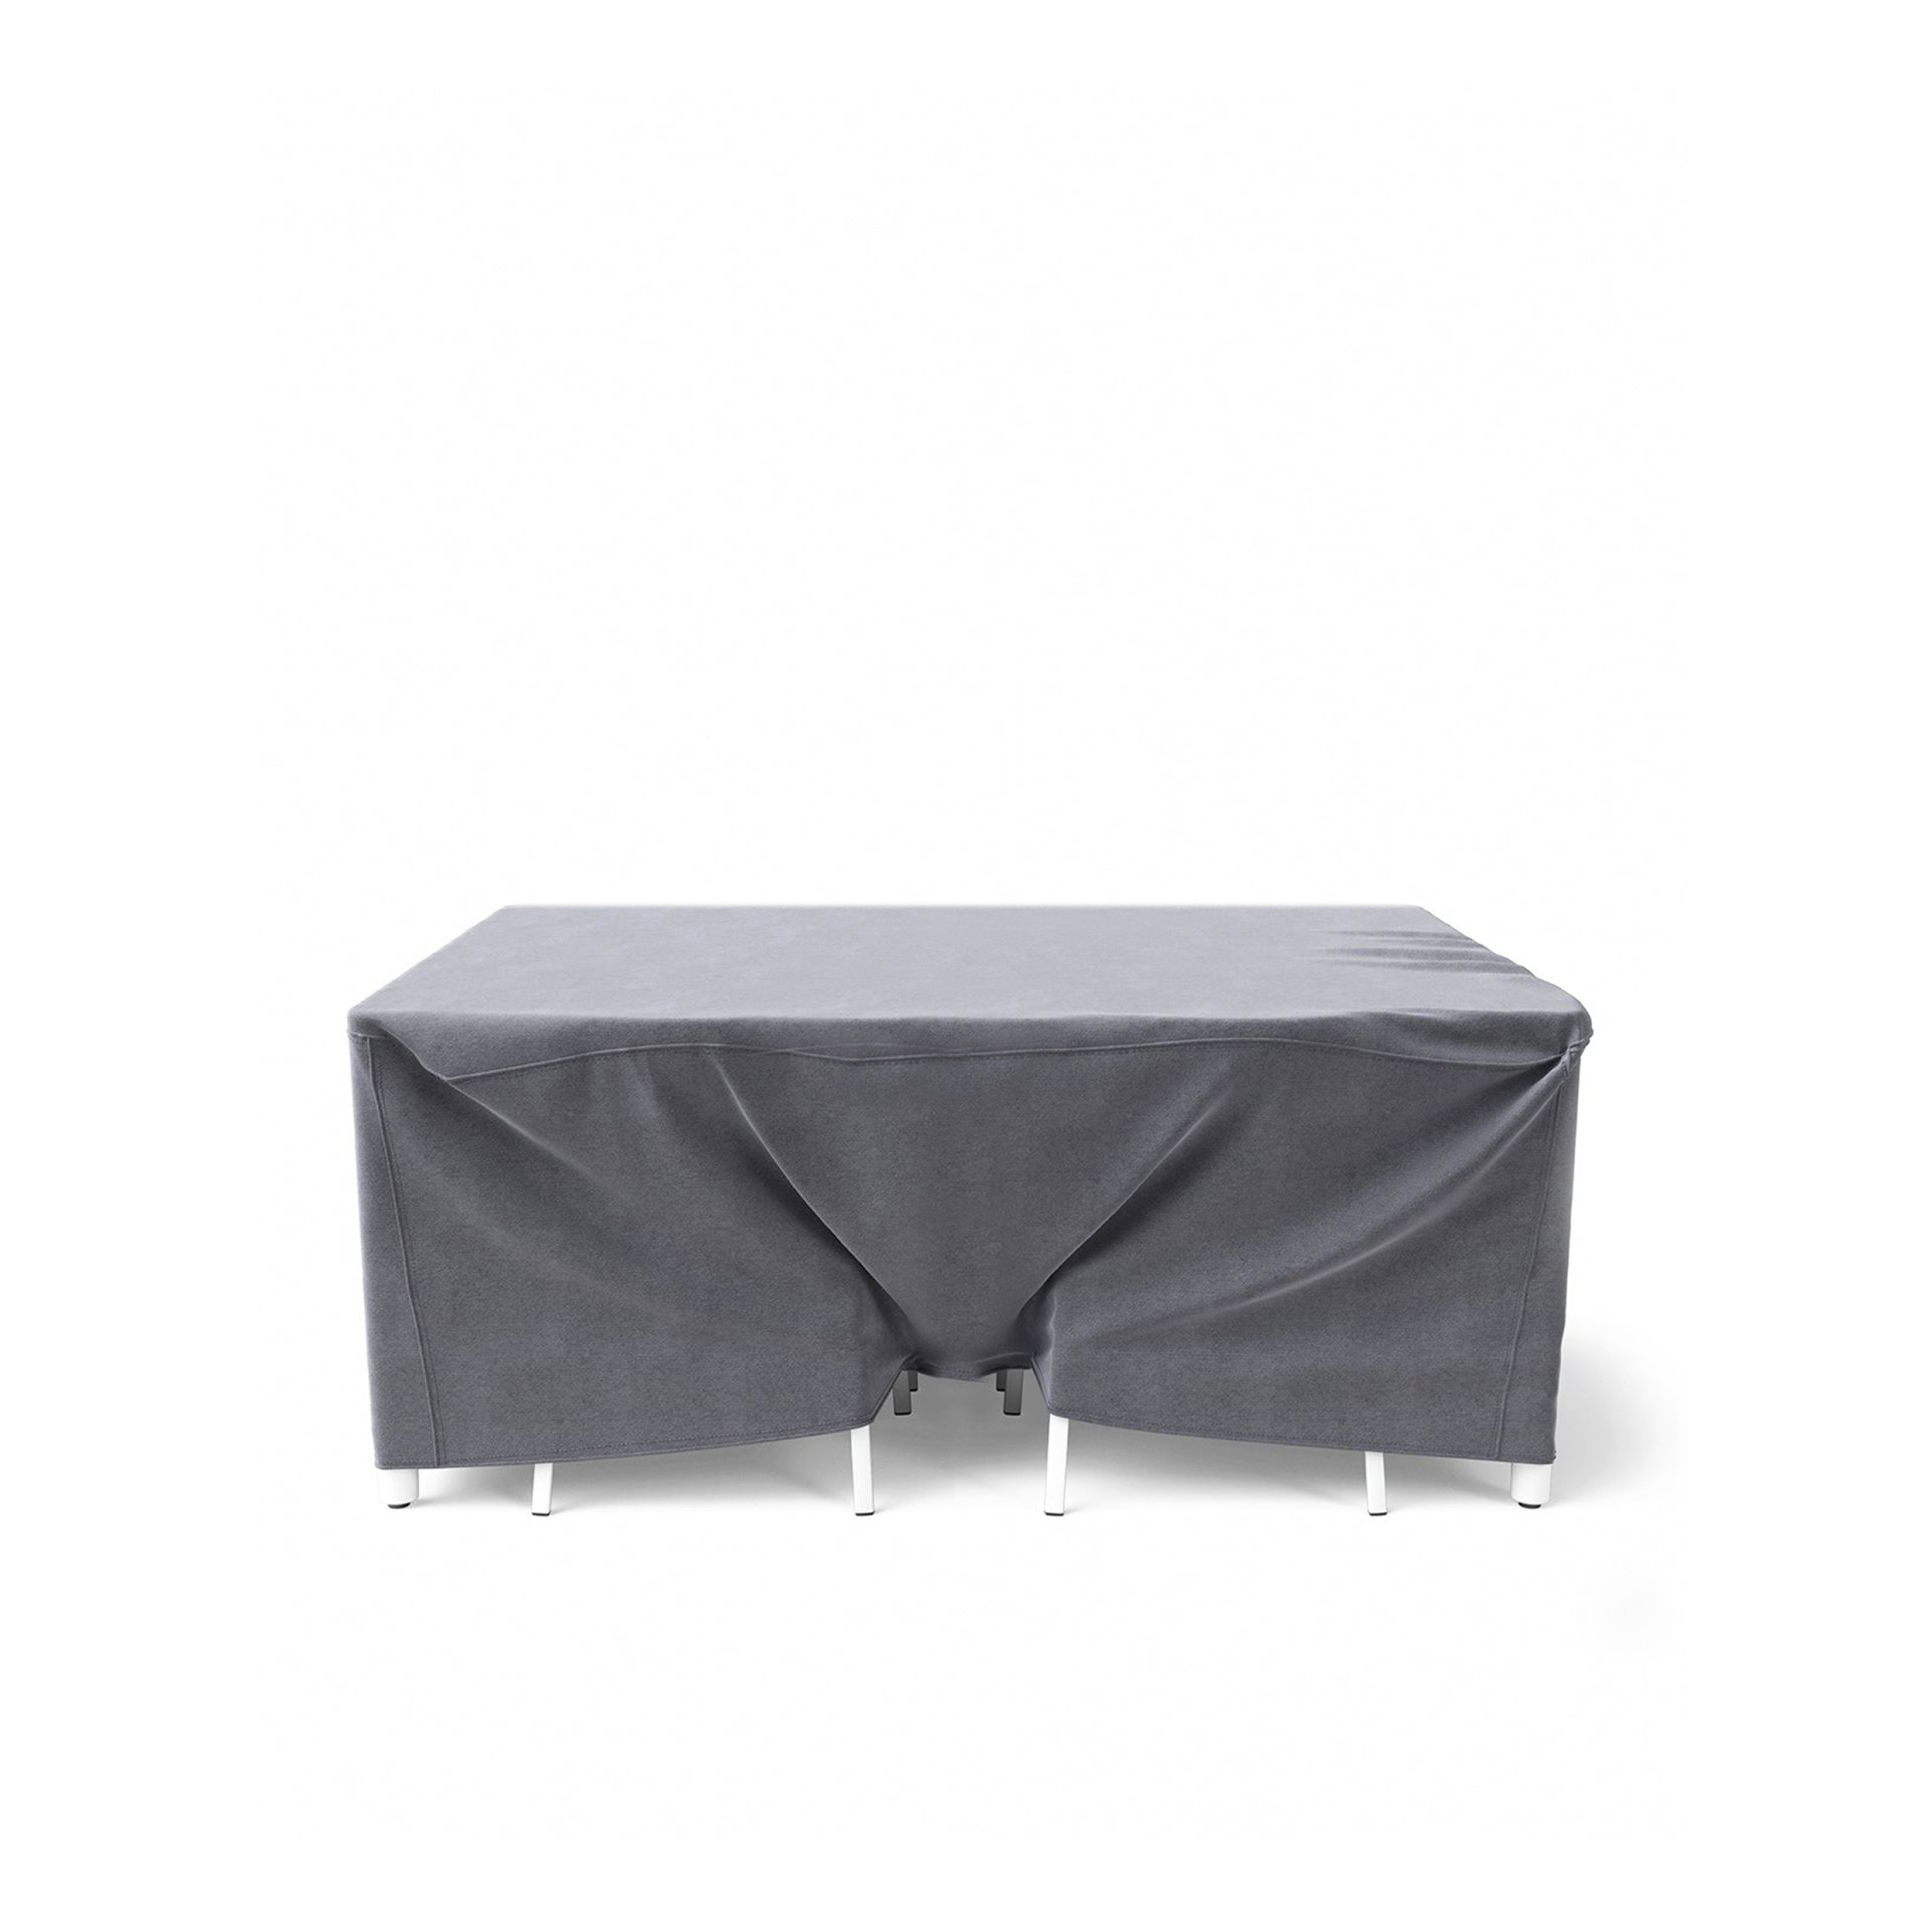 VIPP 718 // OPEN-AIR TABLE - COVER